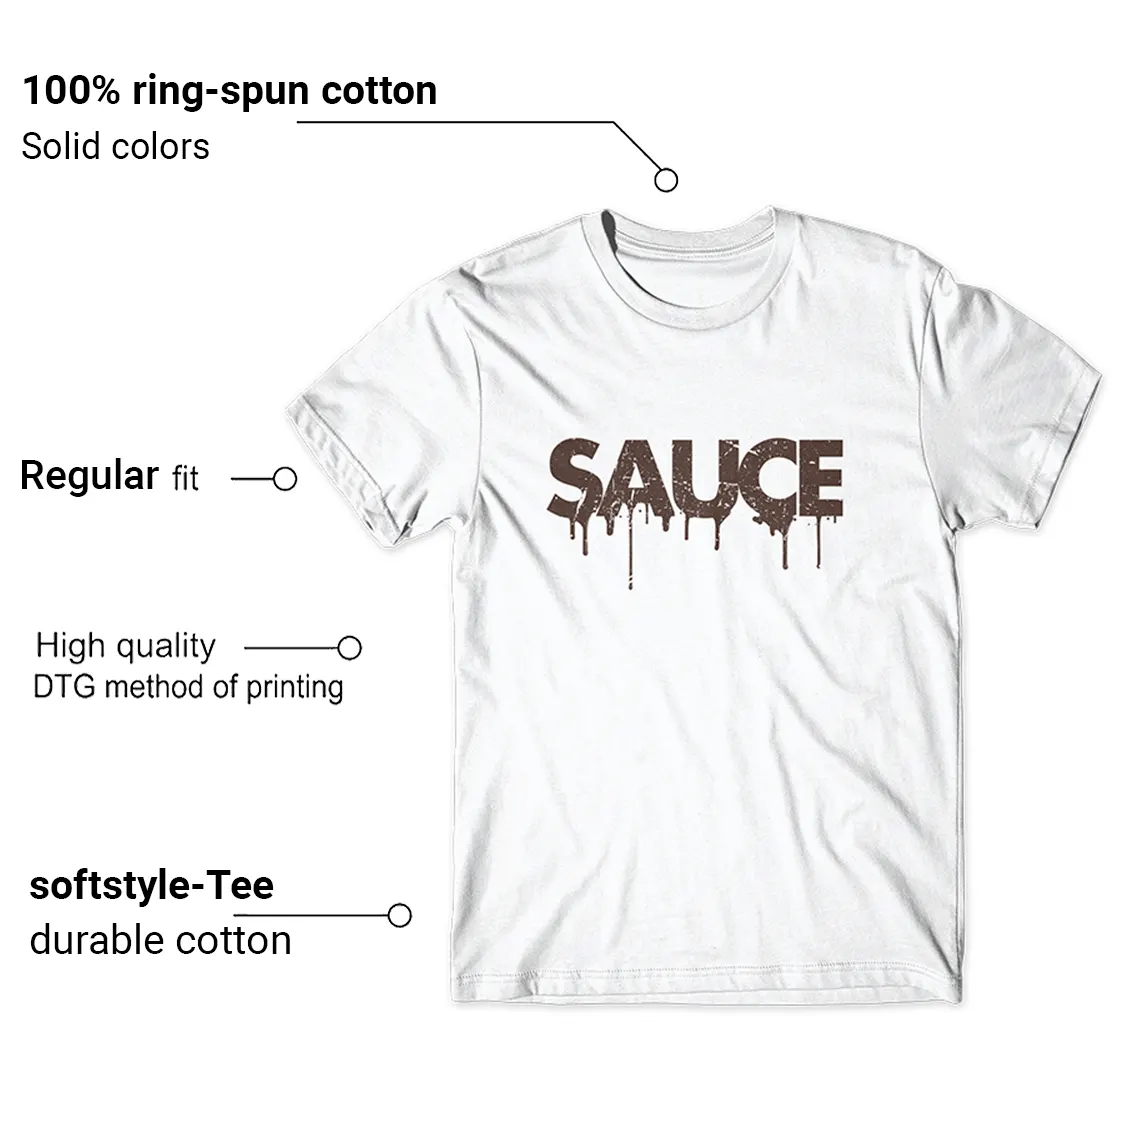 Nike Dunk Low Cacao Wow Shirt Sauce Graphic Features